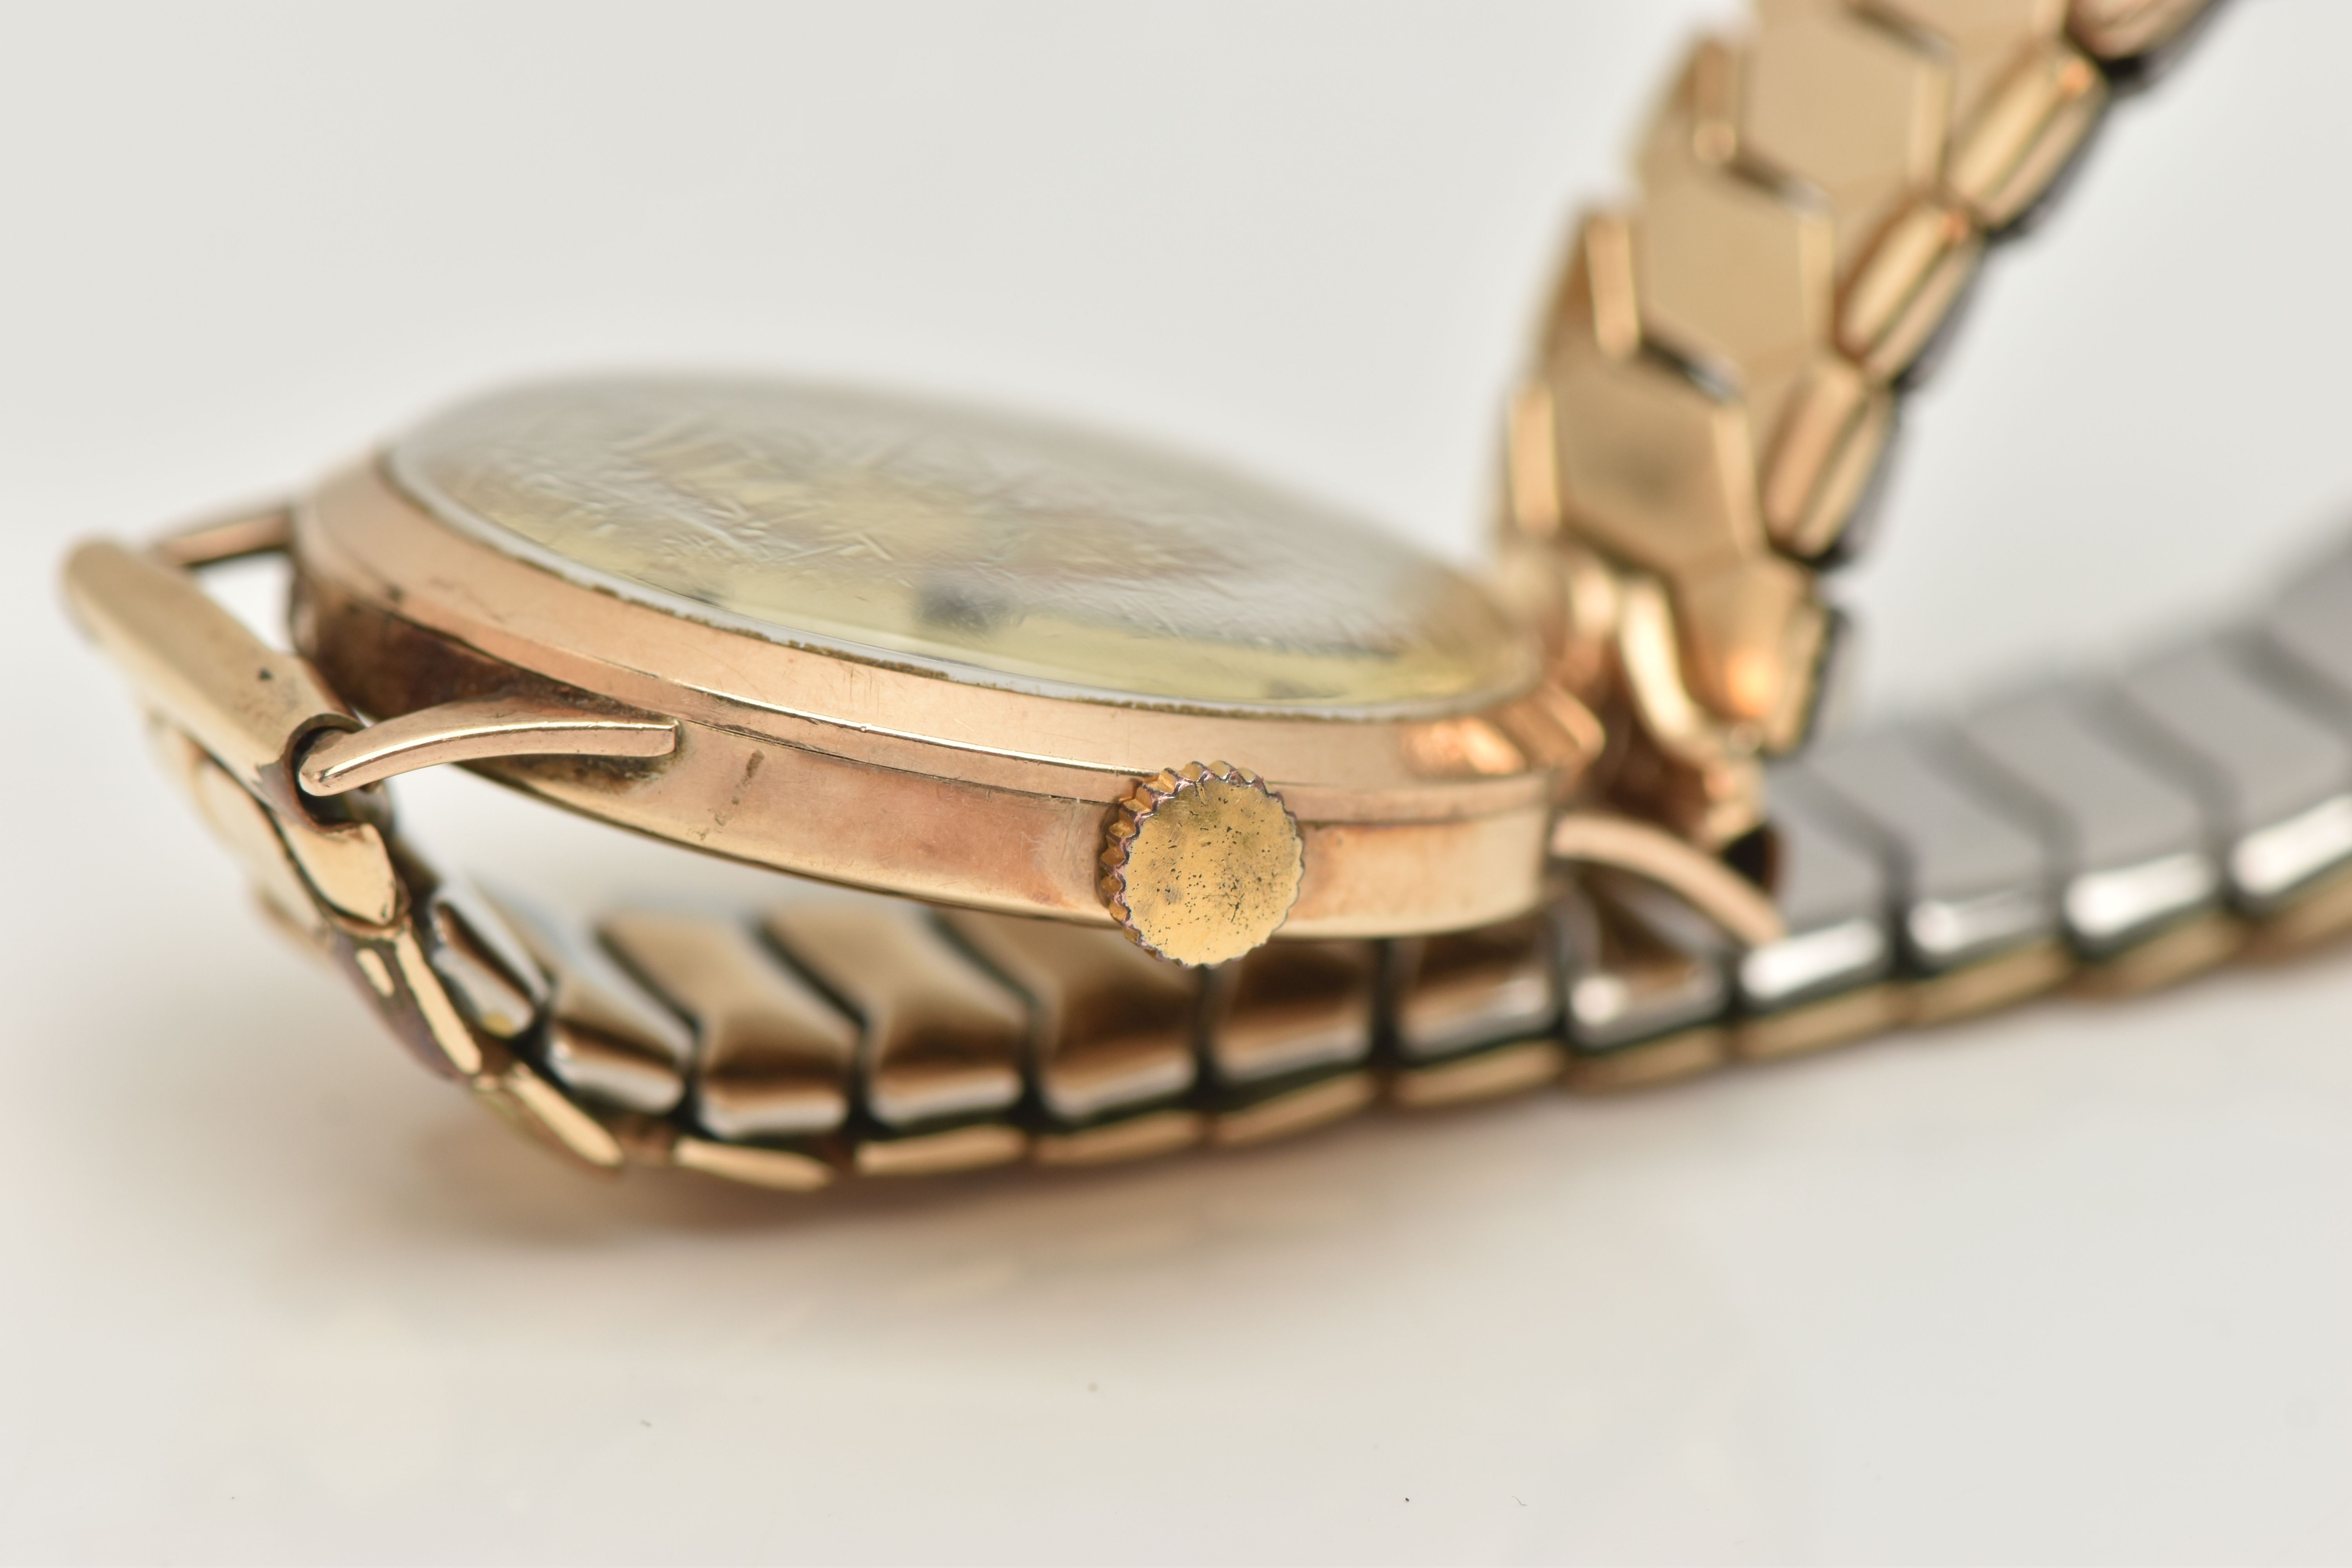 A 9CT GOLD 'TUDOR' WRISTWATCH, hand wound movement, round dial signed 'Tudor', Arabic numerals, - Image 6 of 6